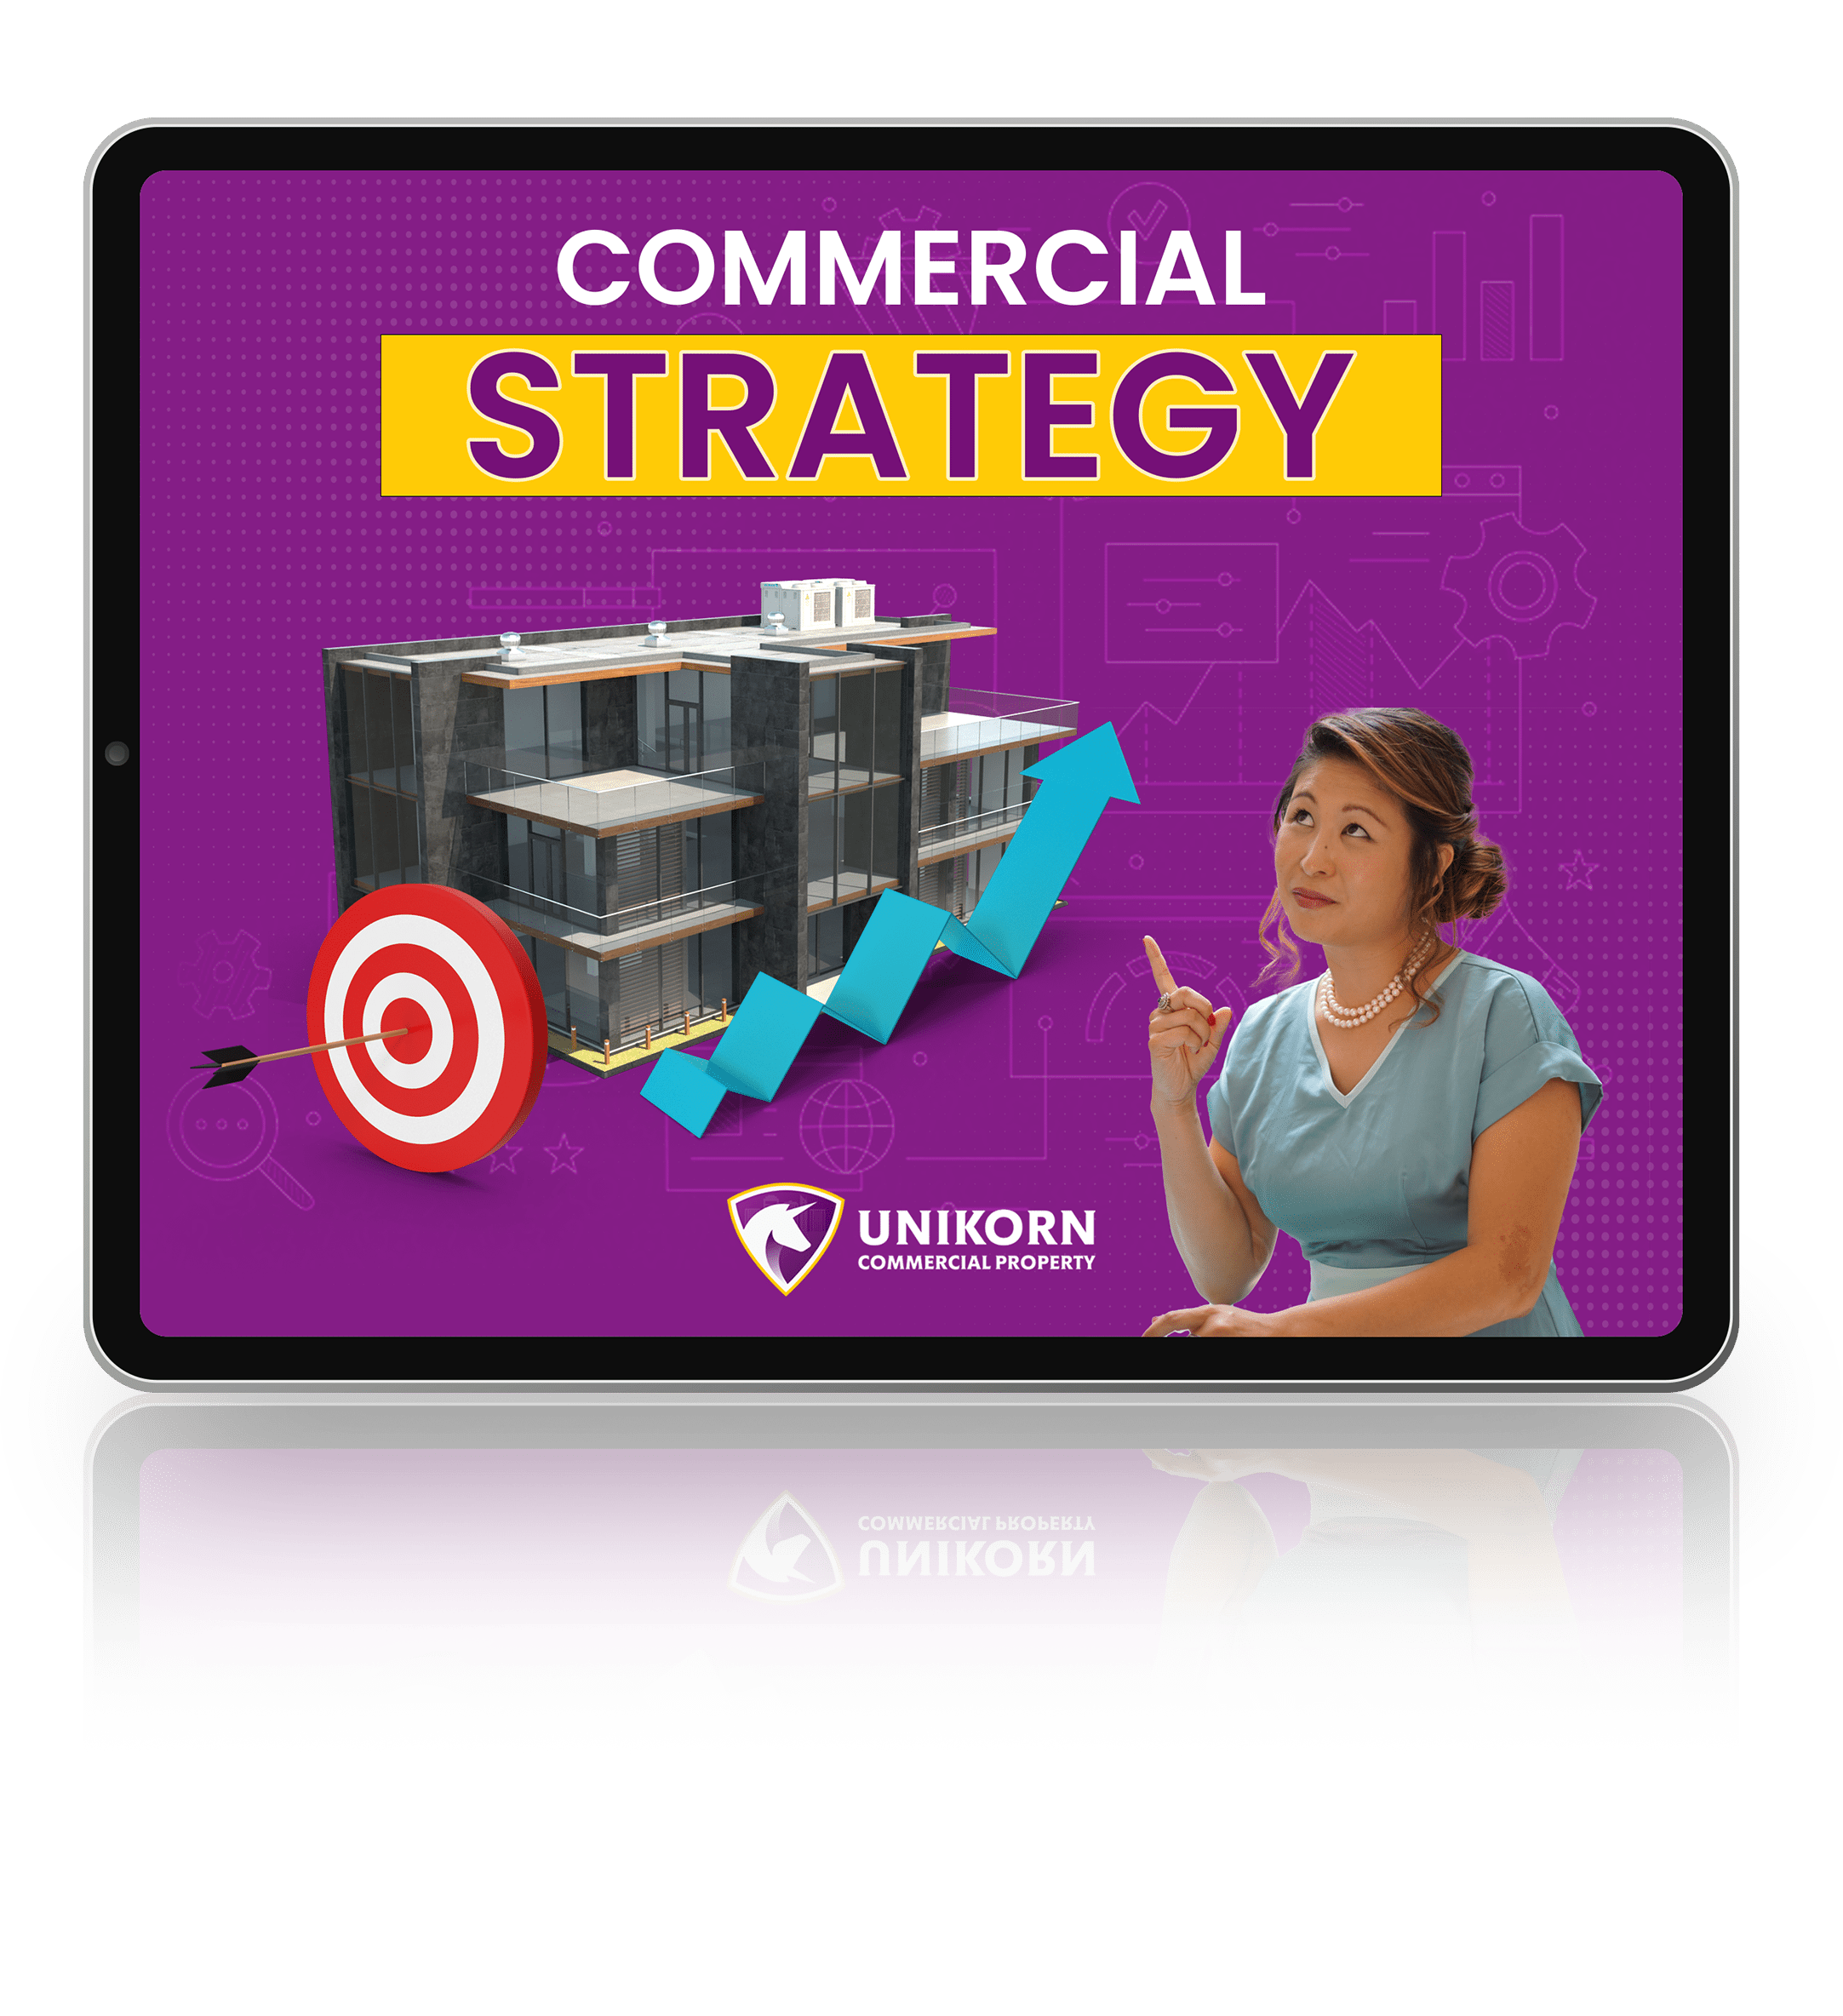 COMMERCIAL-STRATEGY